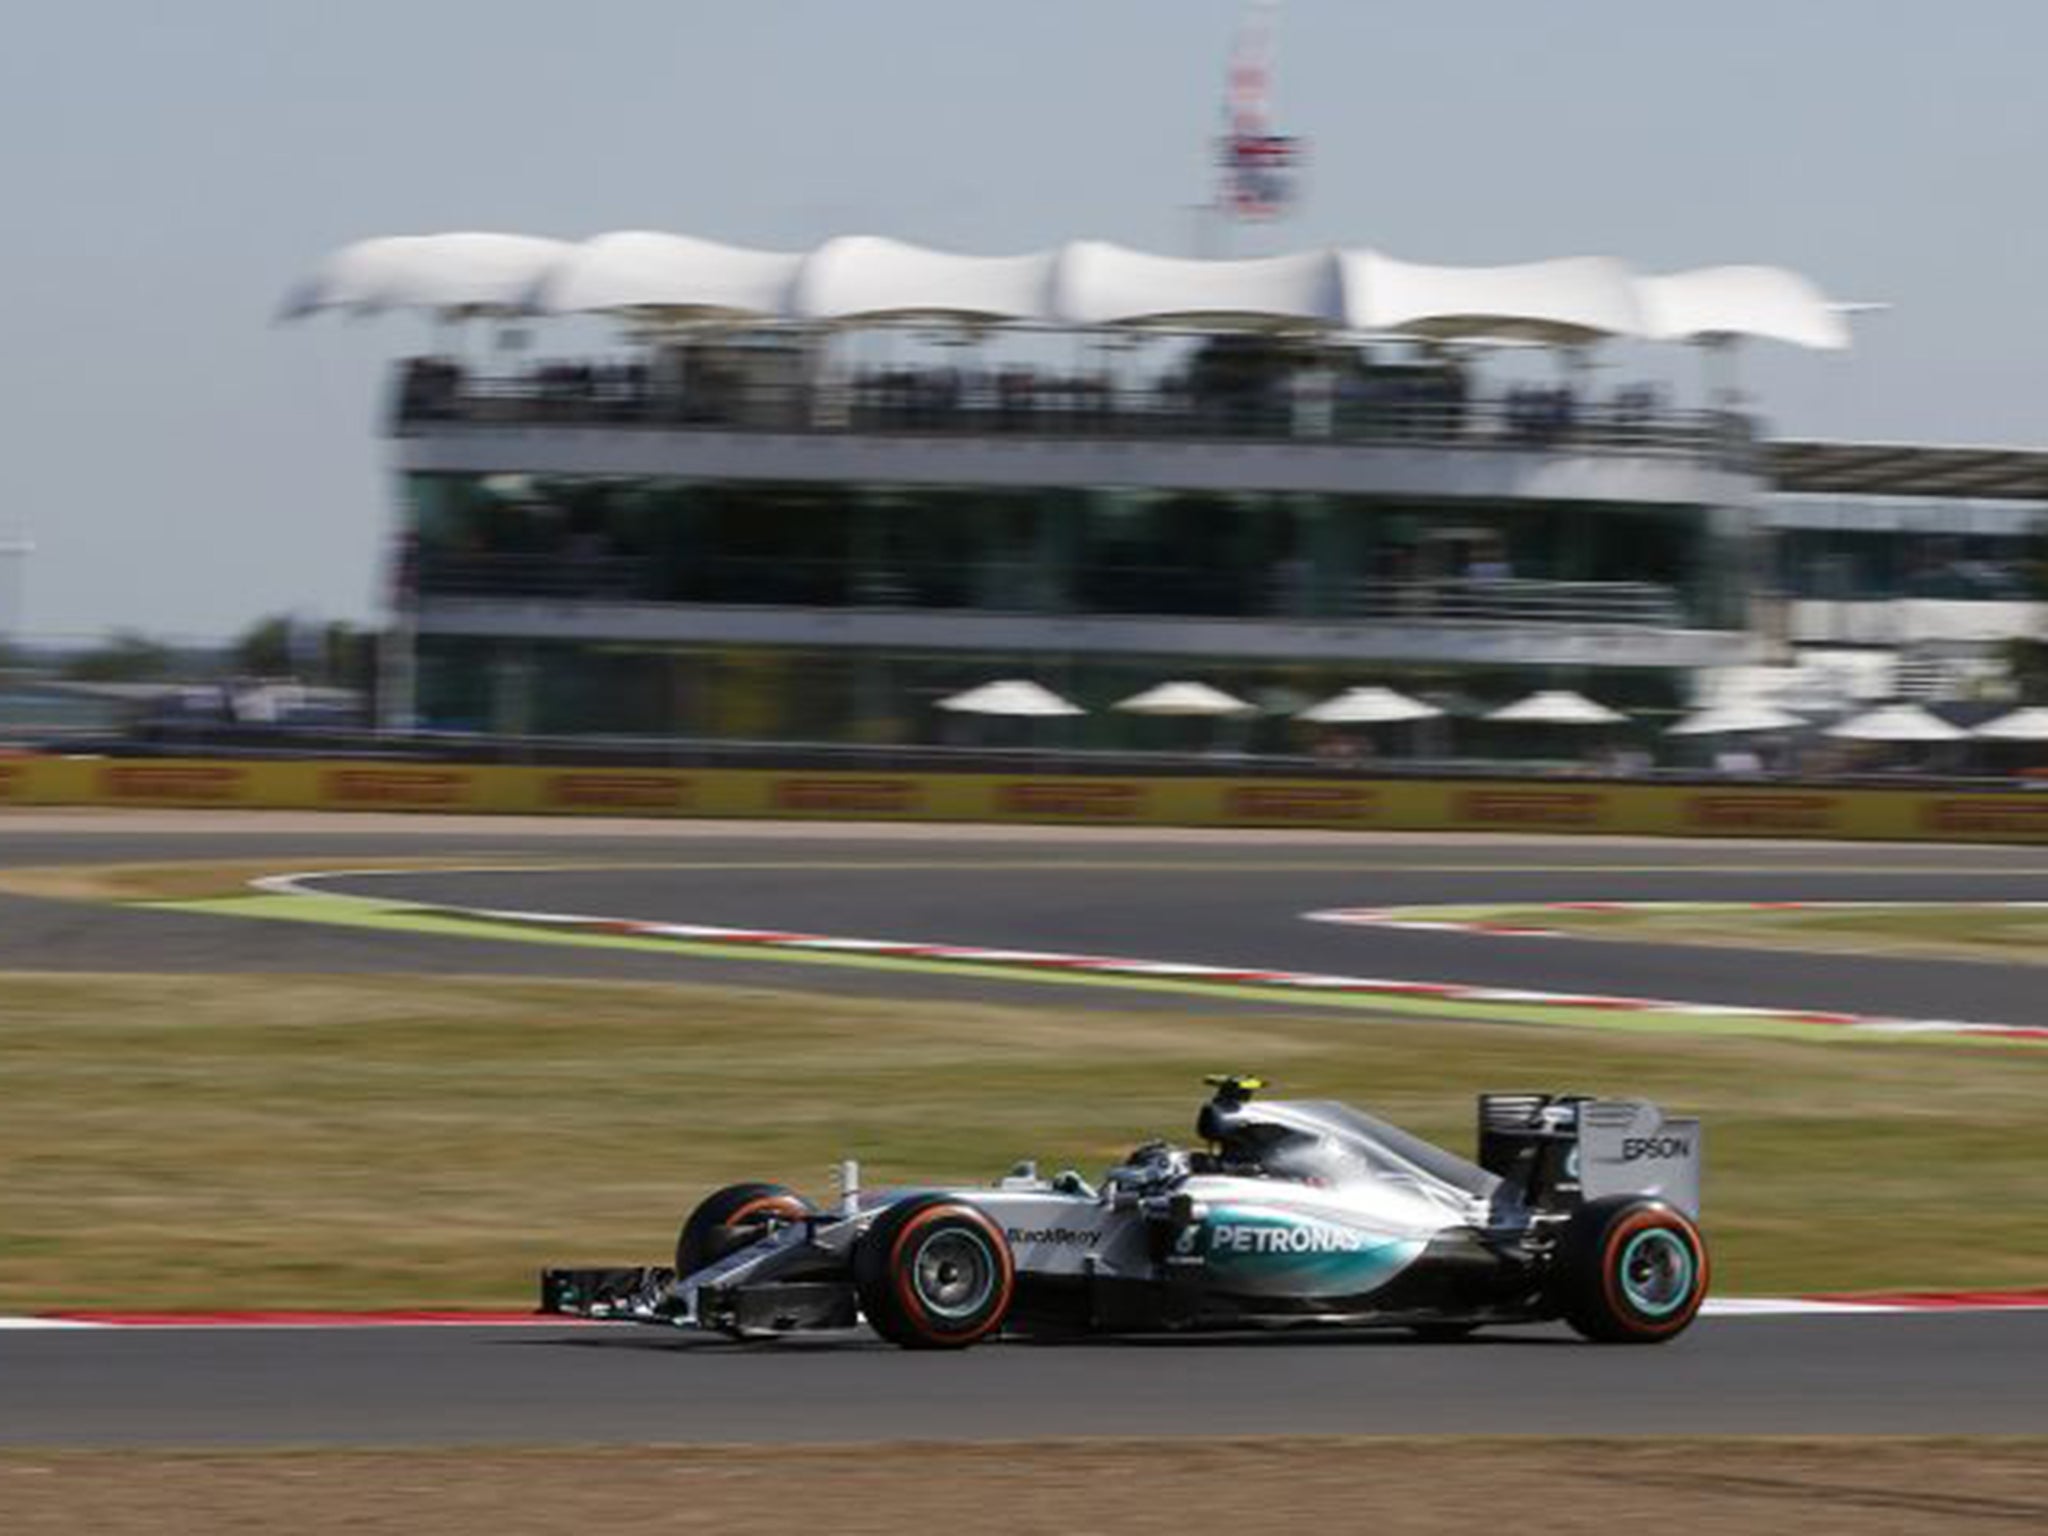 Nico Rosberg was fastest in practice for the British Grand Prix at Silverstone on Friday